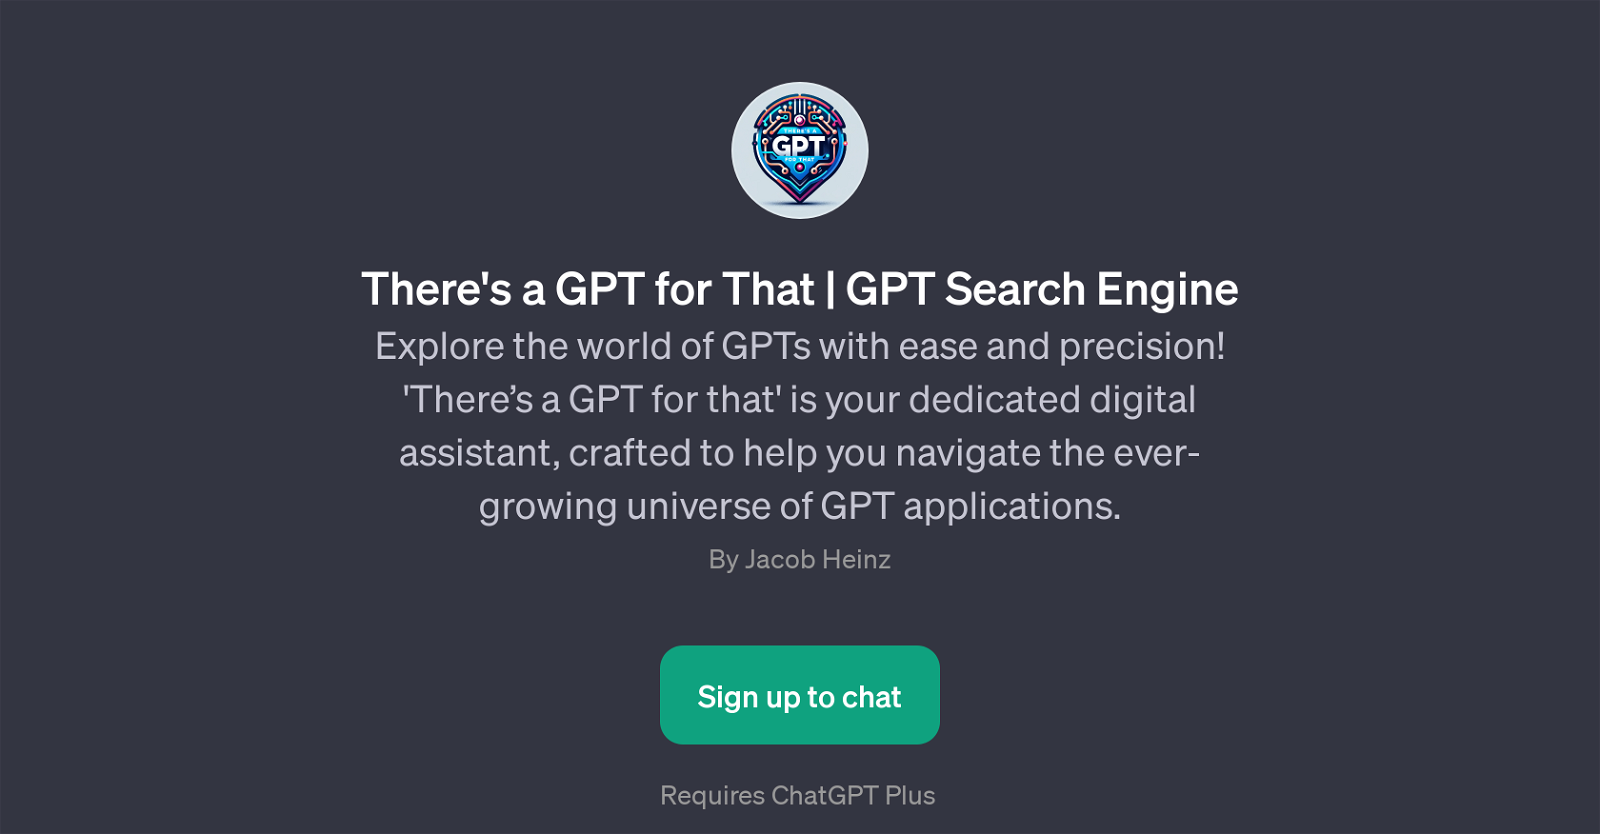 There's a GPT for That | GPT Search Engine website